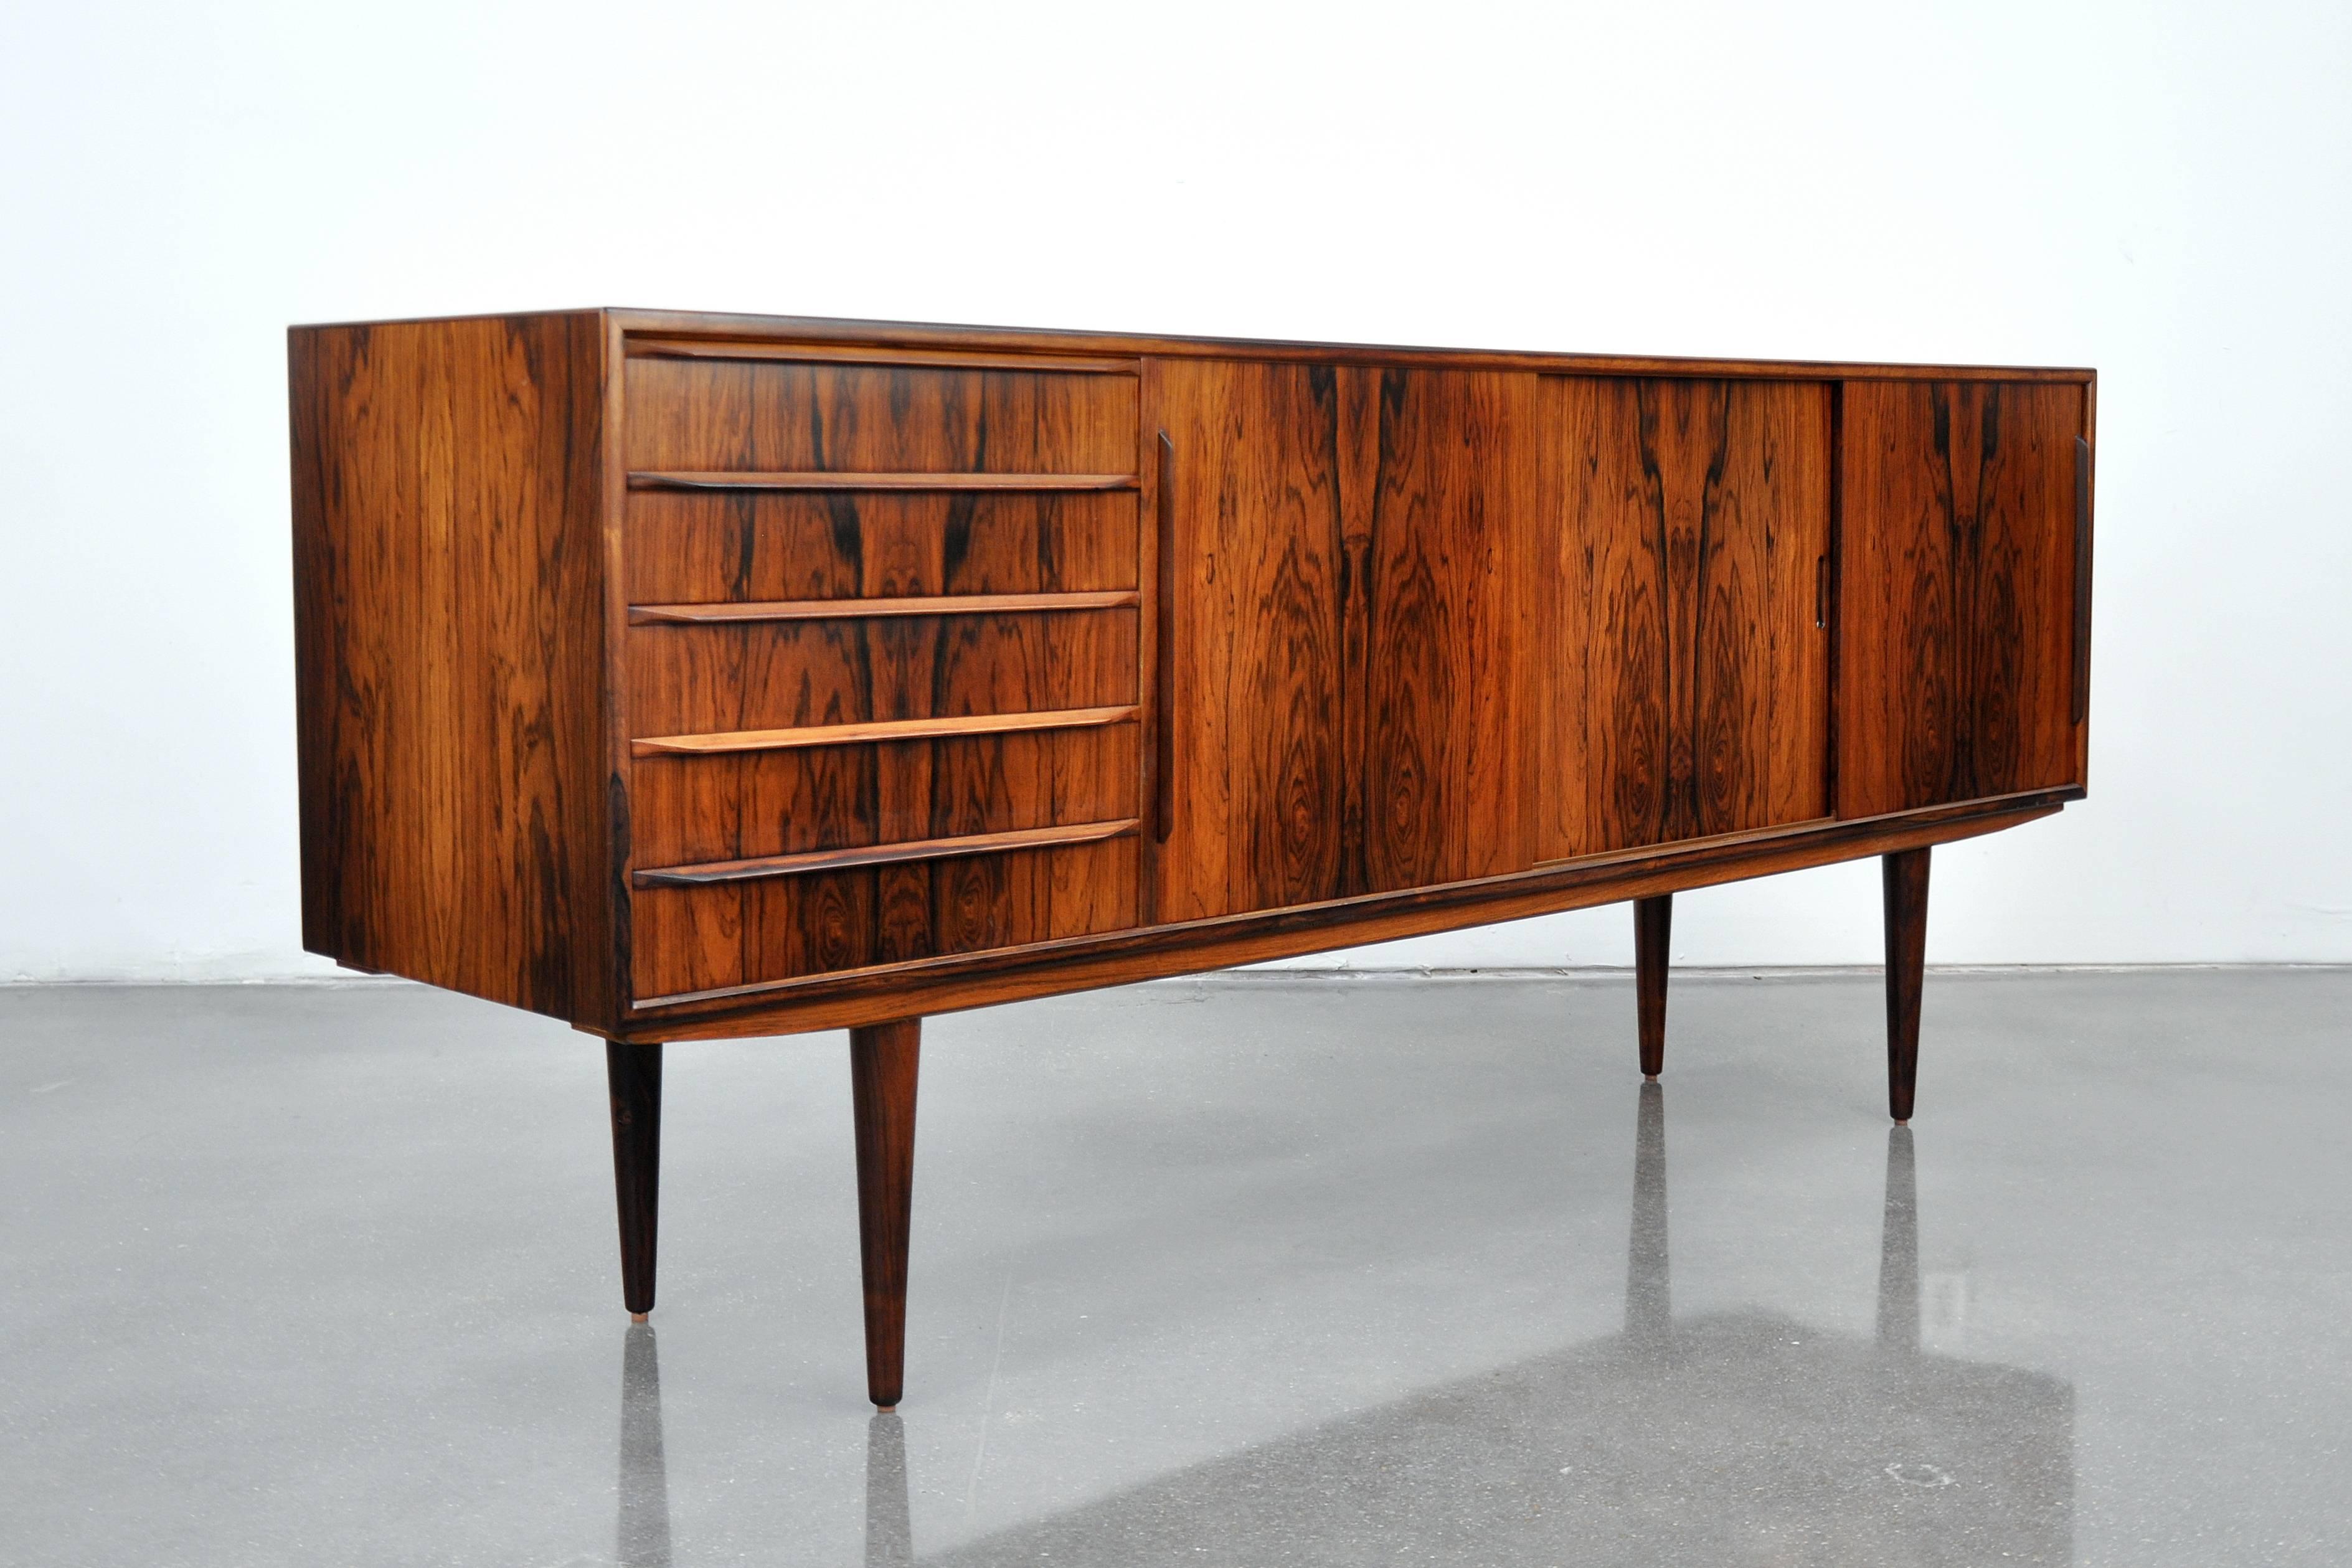 Outstanding midcentury Danish Mid-Century Modern four bay sideboard or bar cabinet made by H.P. Hansen in Randers, Denmark, and dating from the 1960s. This stunning buffet features a striking silhouette with long, slender and elegantly tapered legs.